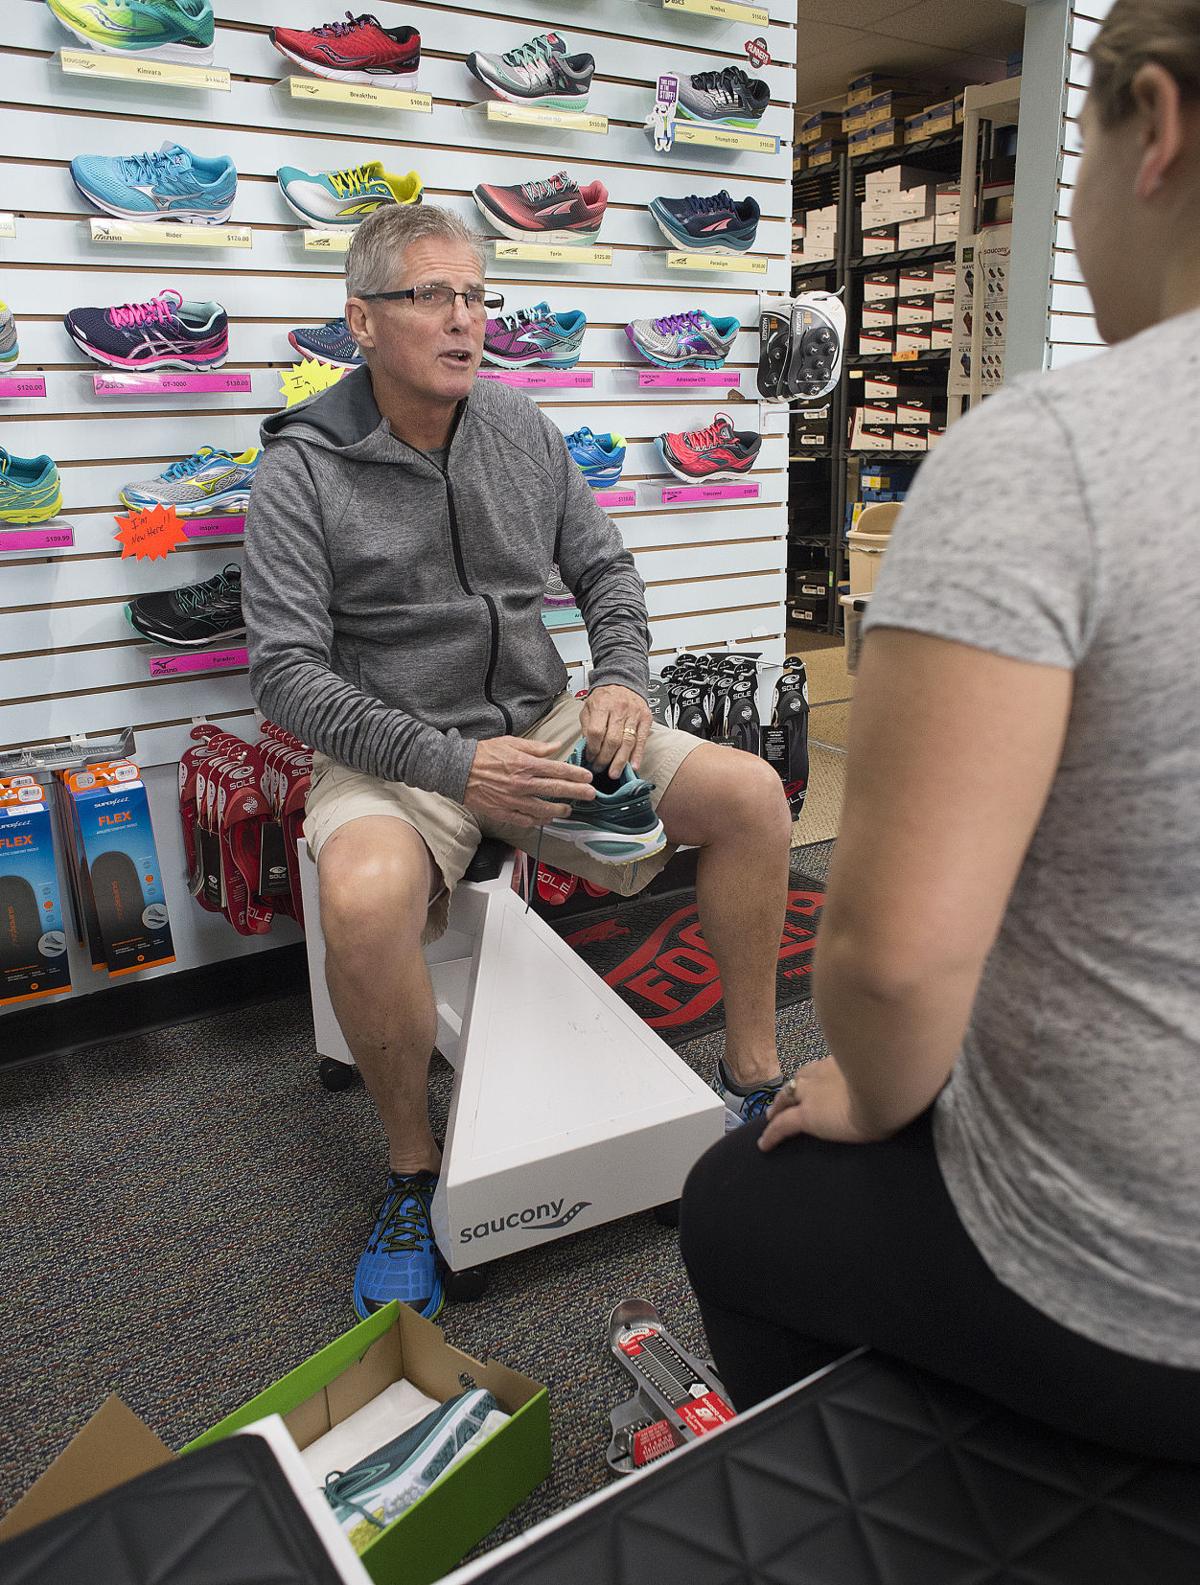 A good run: Local running store owner to retire, sell shop to Maryland